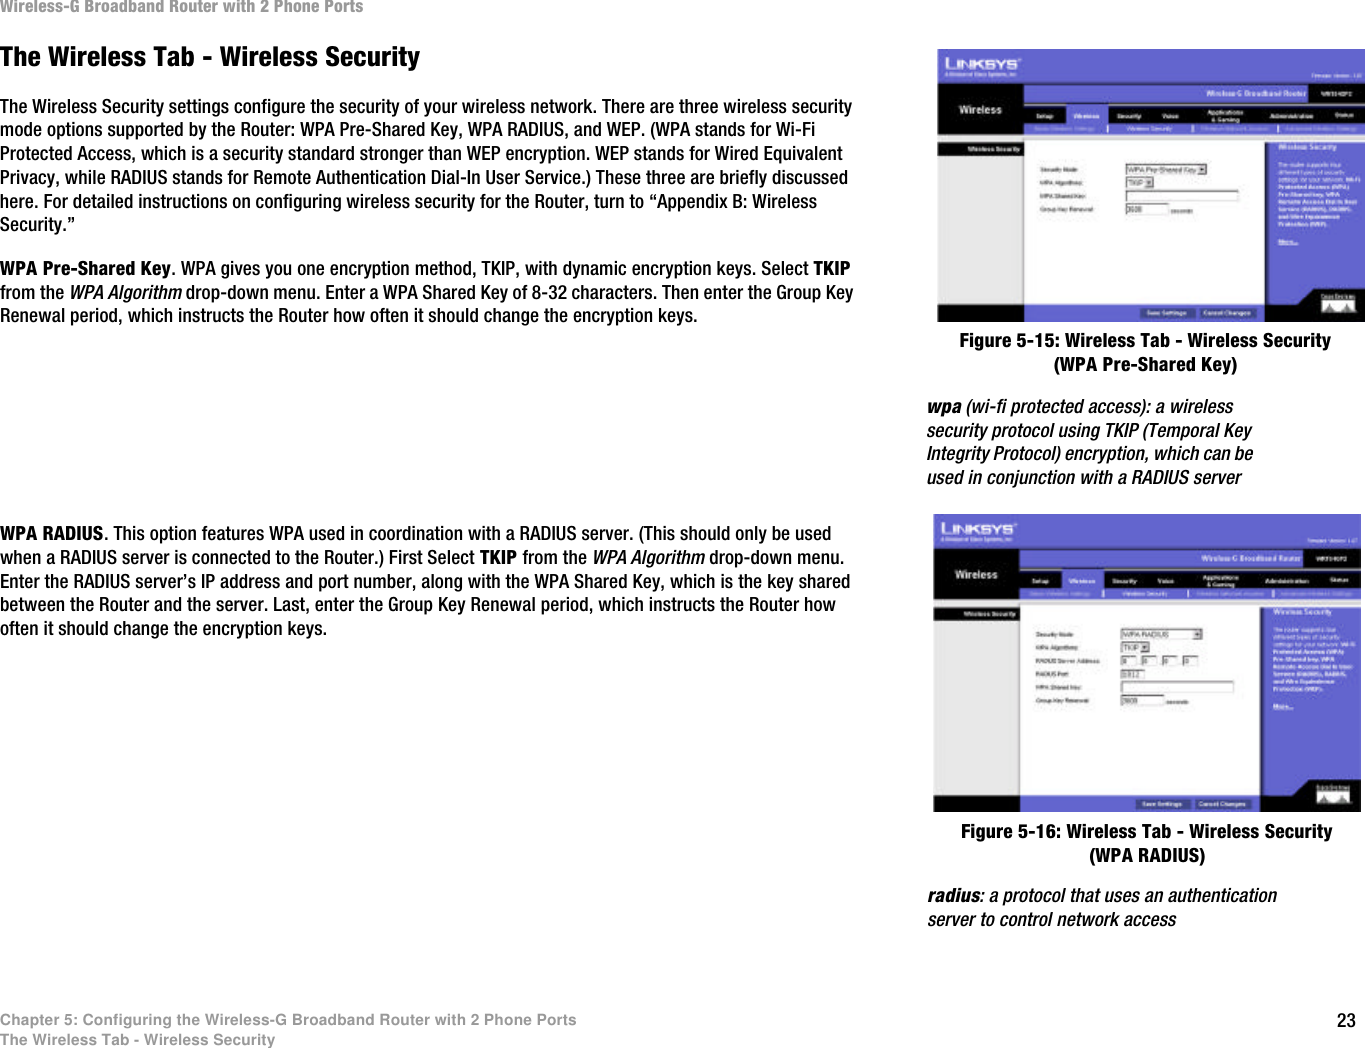 23Chapter 5: Configuring the Wireless-G Broadband Router with 2 Phone PortsThe Wireless Tab - Wireless SecurityWireless-G Broadband Router with 2 Phone PortsThe Wireless Tab - Wireless SecurityThe Wireless Security settings configure the security of your wireless network. There are three wireless security mode options supported by the Router: WPA Pre-Shared Key, WPA RADIUS, and WEP. (WPA stands for Wi-Fi Protected Access, which is a security standard stronger than WEP encryption. WEP stands for Wired Equivalent Privacy, while RADIUS stands for Remote Authentication Dial-In User Service.) These three are briefly discussed here. For detailed instructions on configuring wireless security for the Router, turn to “Appendix B: Wireless Security.”WPA Pre-Shared Key. WPA gives you one encryption method, TKIP, with dynamic encryption keys. Select TKIP from the WPA Algorithm drop-down menu. Enter a WPA Shared Key of 8-32 characters. Then enter the Group Key Renewal period, which instructs the Router how often it should change the encryption keys.WPA RADIUS. This option features WPA used in coordination with a RADIUS server. (This should only be used when a RADIUS server is connected to the Router.) First Select TKIP from the WPA Algorithm drop-down menu. Enter the RADIUS server’s IP address and port number, along with the WPA Shared Key, which is the key shared between the Router and the server. Last, enter the Group Key Renewal period, which instructs the Router how often it should change the encryption keys.Figure 5-15: Wireless Tab - Wireless Security (WPA Pre-Shared Key)Figure 5-16: Wireless Tab - Wireless Security (WPA RADIUS)radius: a protocol that uses an authentication server to control network accesswpa (wi-fi protected access): a wireless security protocol using TKIP (Temporal Key Integrity Protocol) encryption, which can be used in conjunction with a RADIUS server